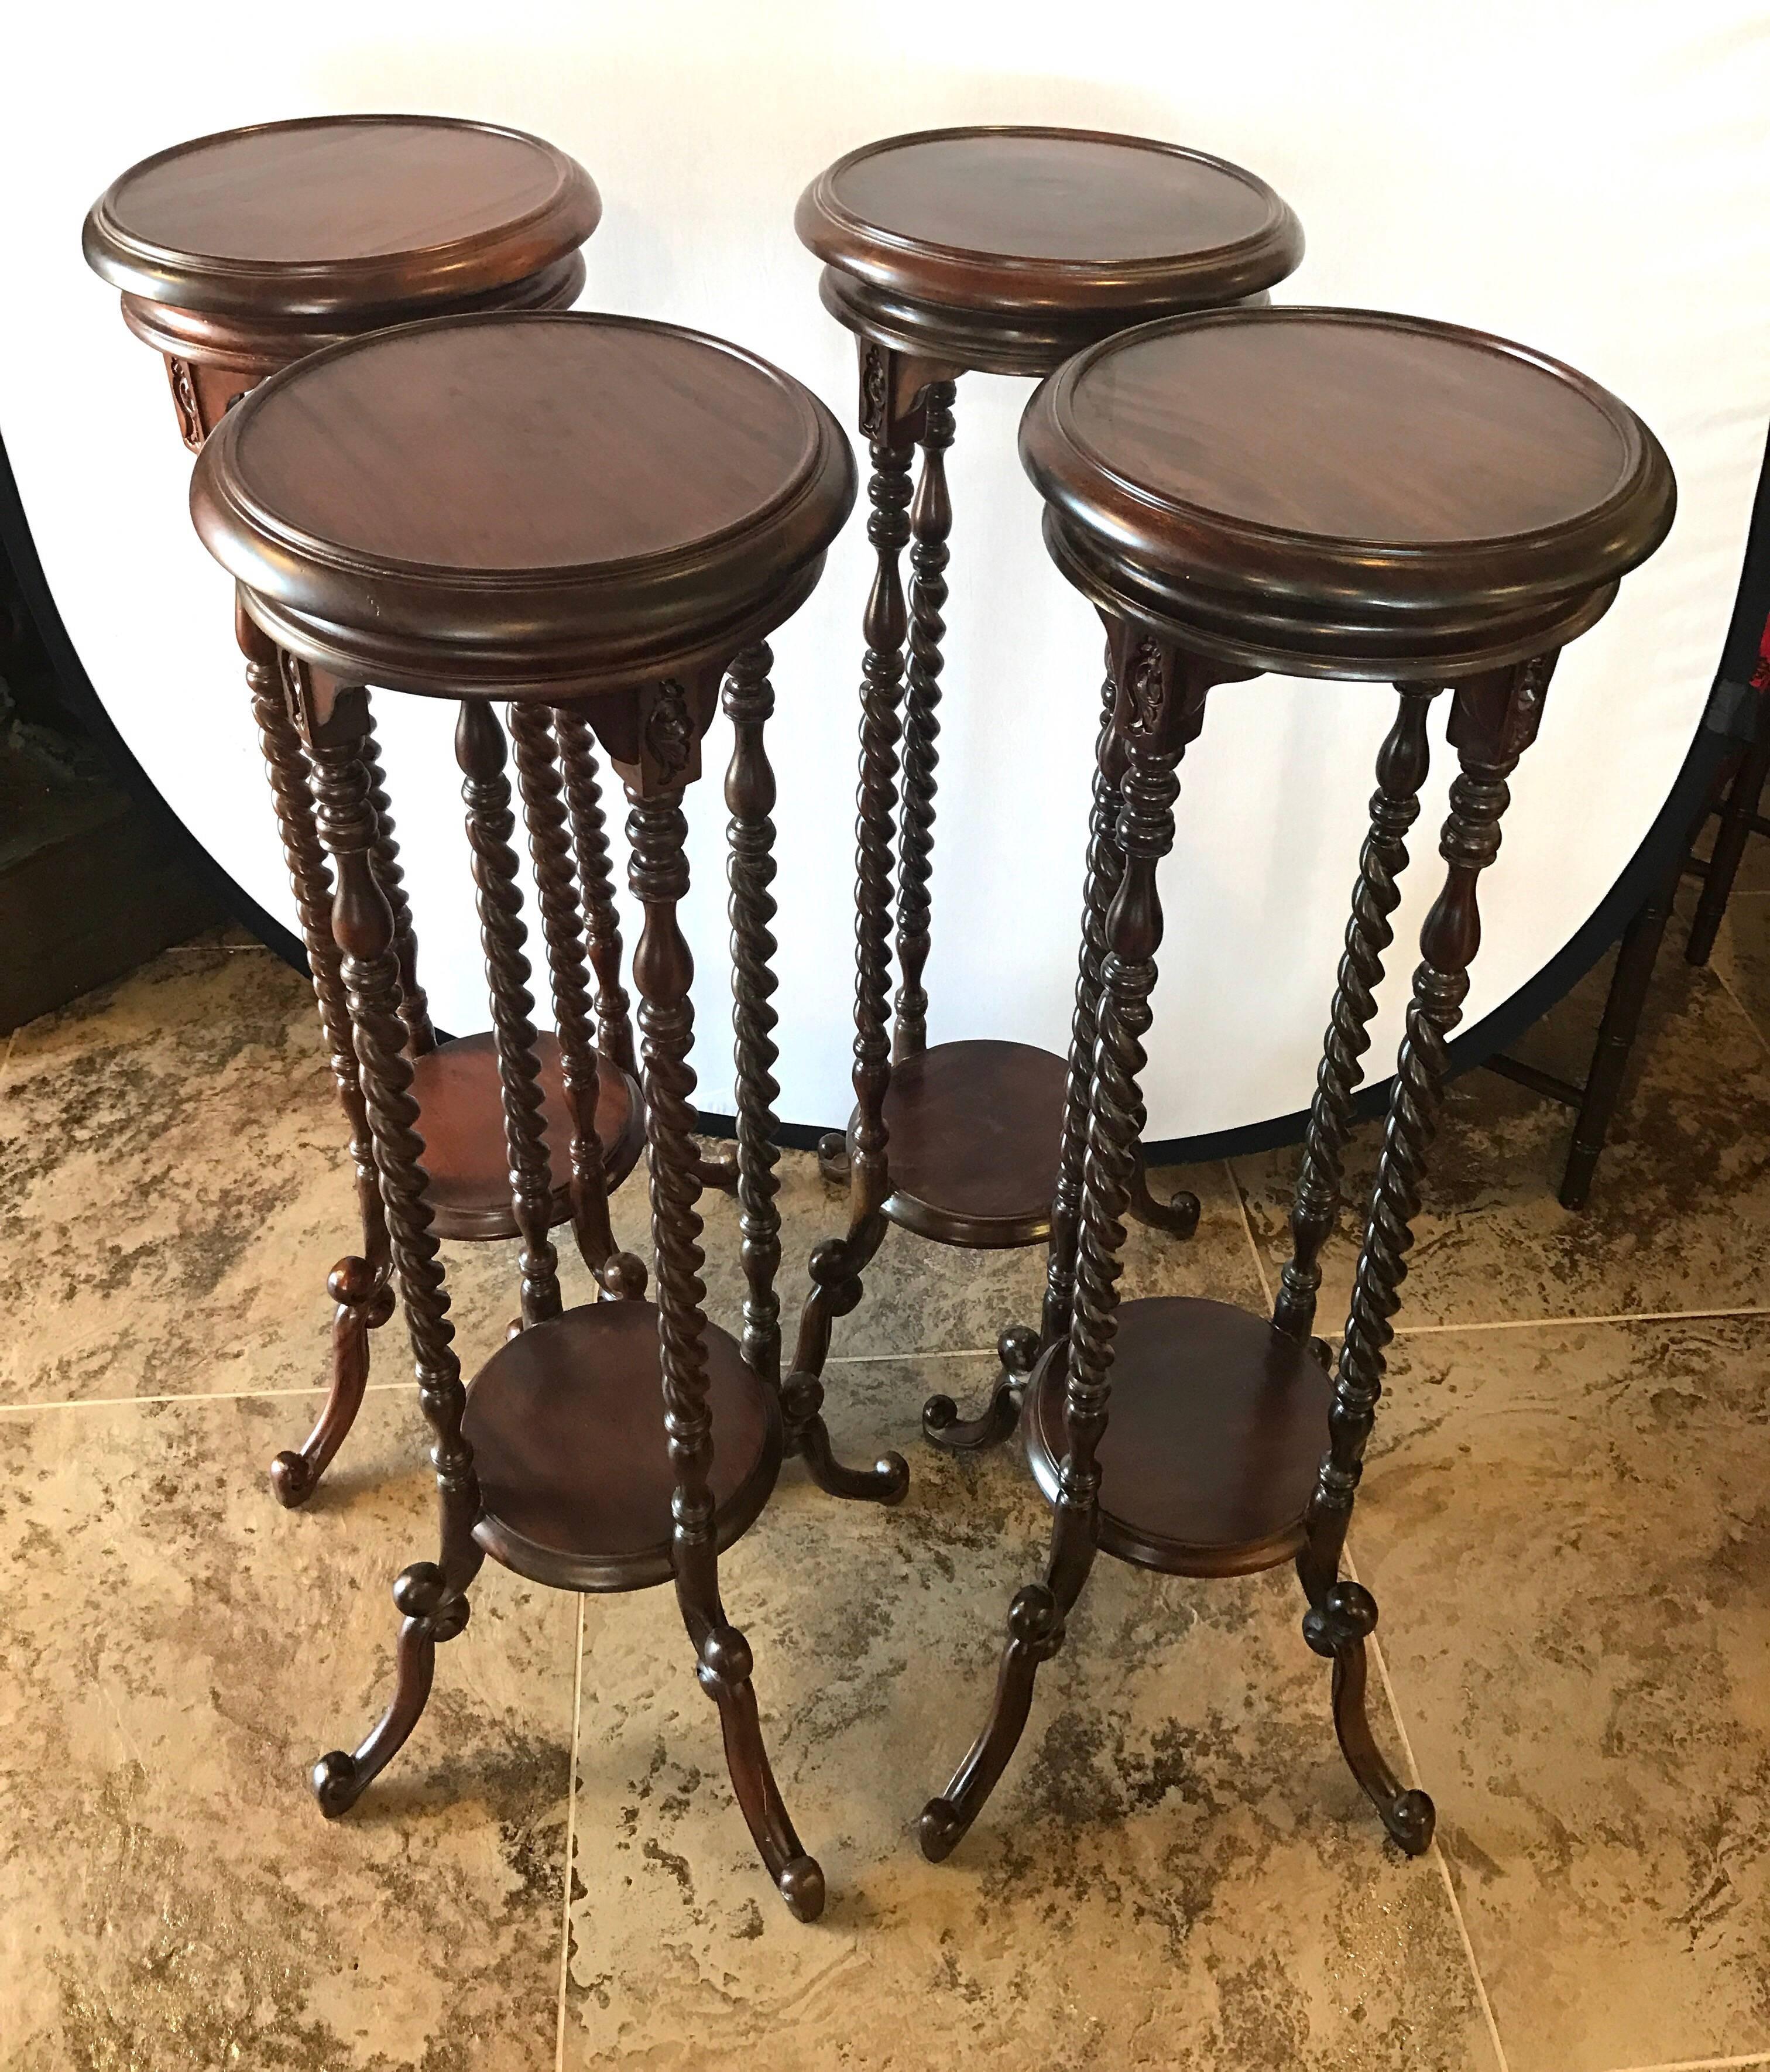 Set of four mahogany pedestals stands with intricate carvings and turned legs.